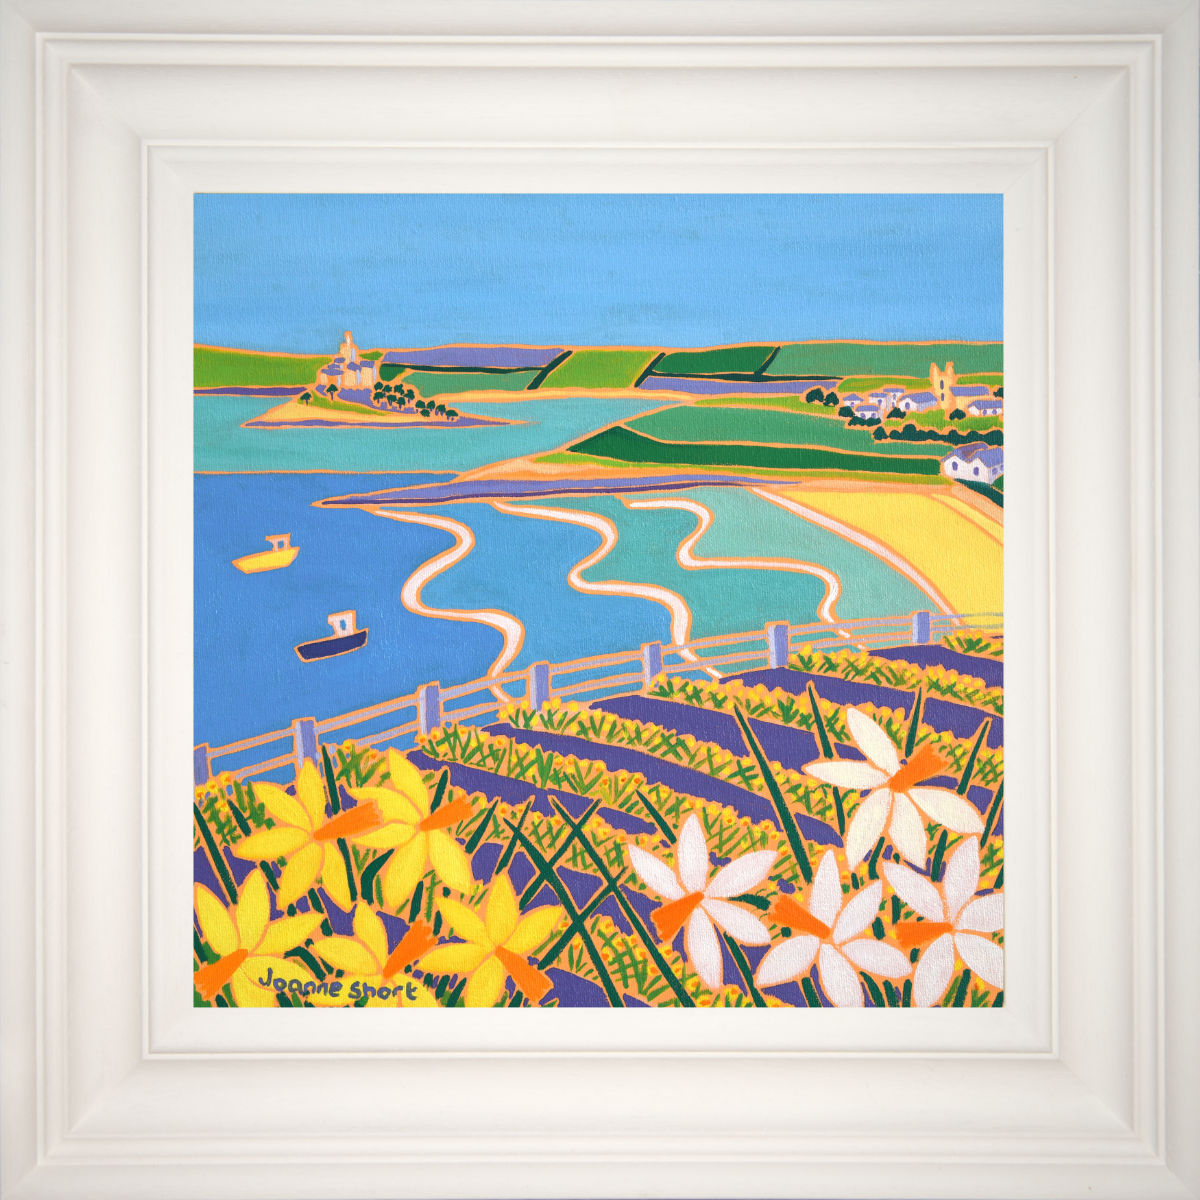 &#39;Spring Daffodils, Perranuthnoe, Mount&#39;s Bay&#39;, 12x12 inches oil on canvas. Cornwall Painting by Cornish Artist Joanne Short. Cornish Art from our Cornwall Art Gallery